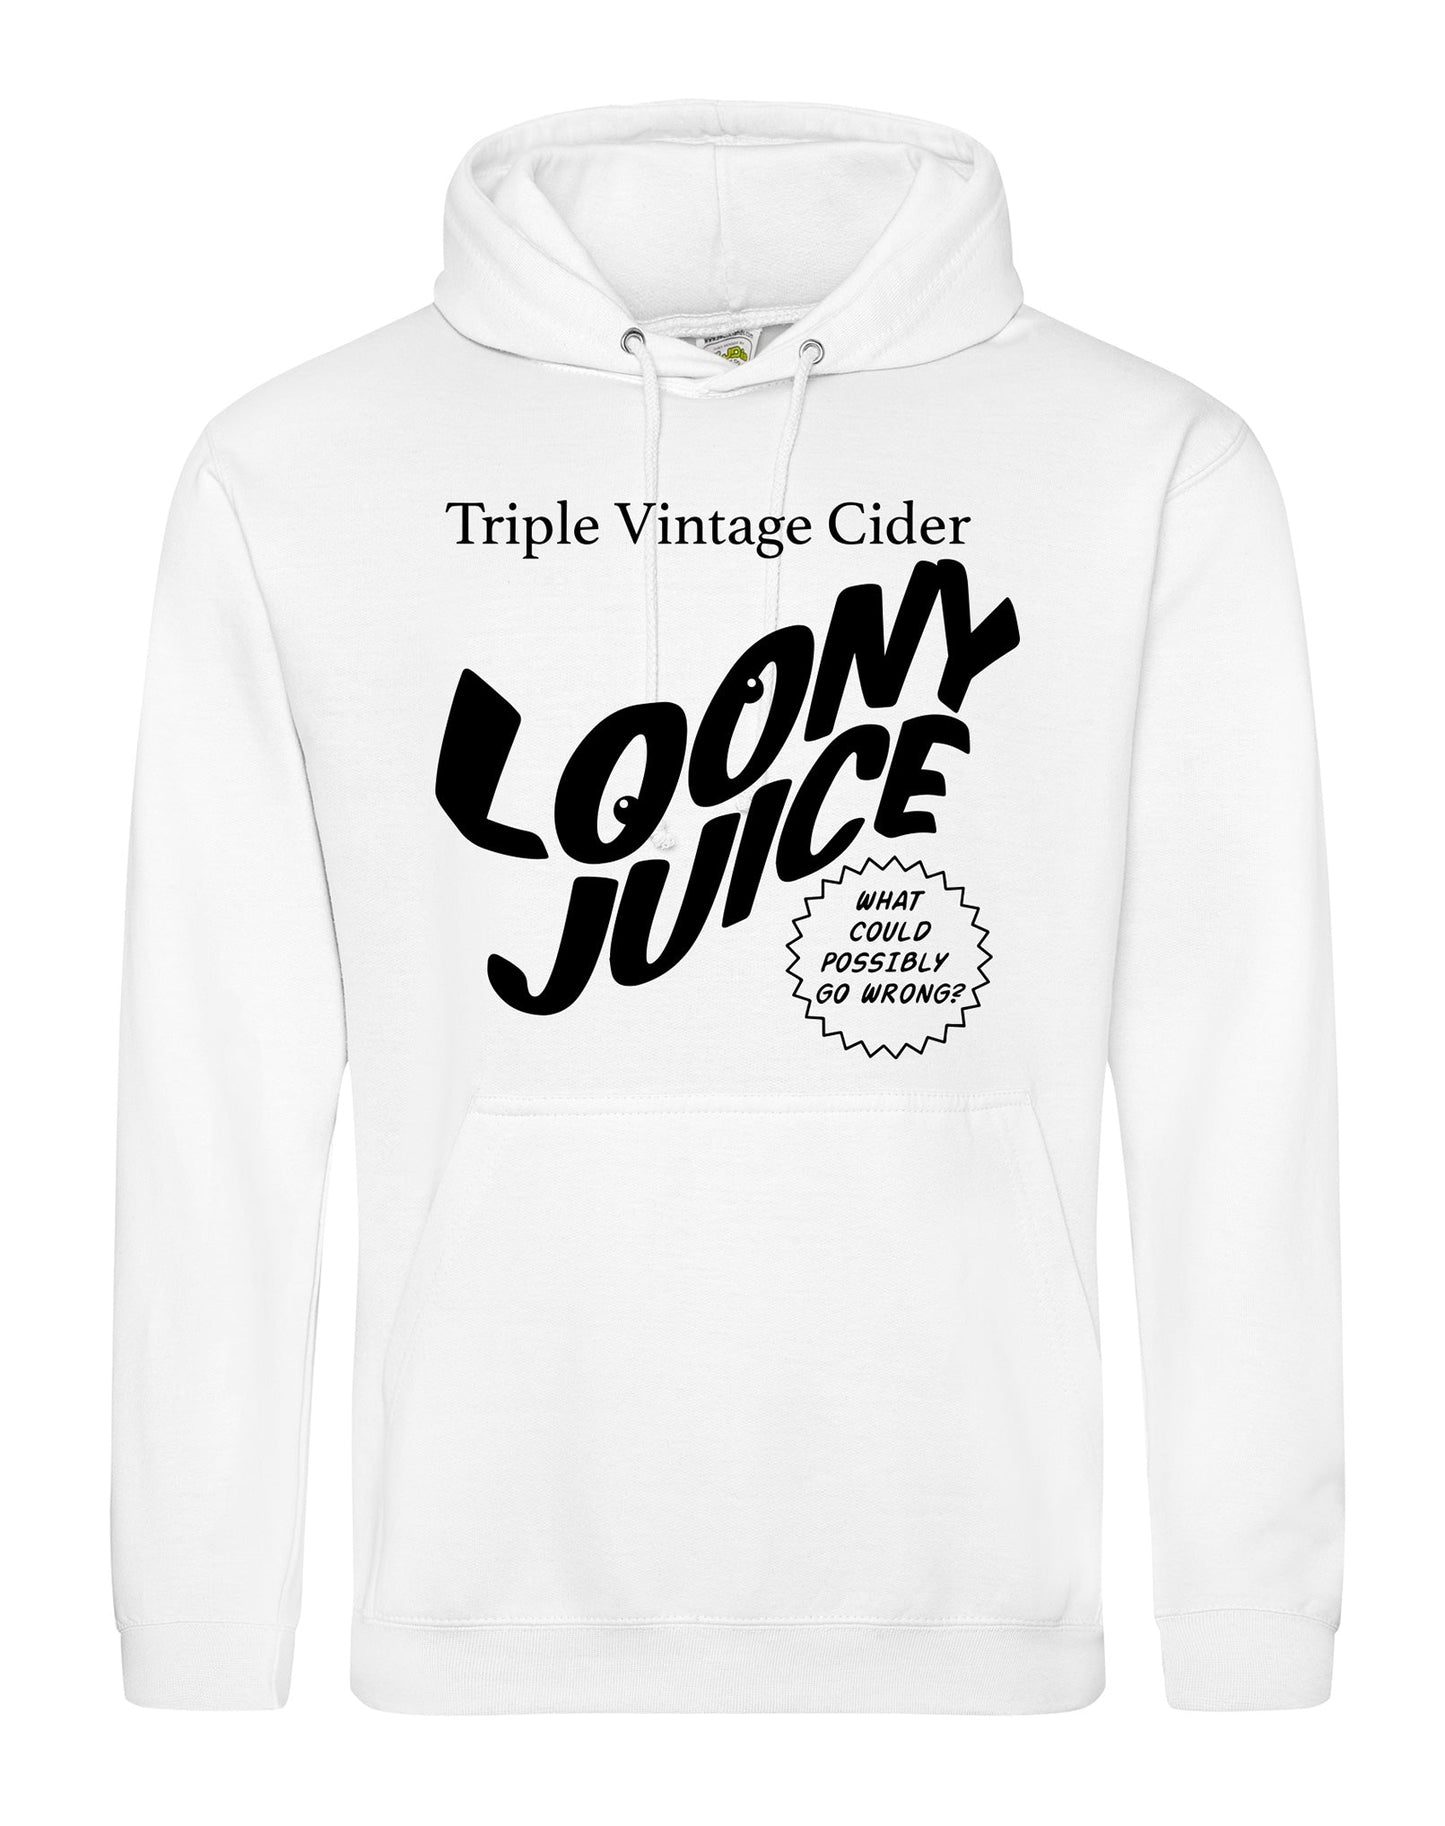 Loony Juice unisex fit hoodie - various colours - Dirty Stop Outs